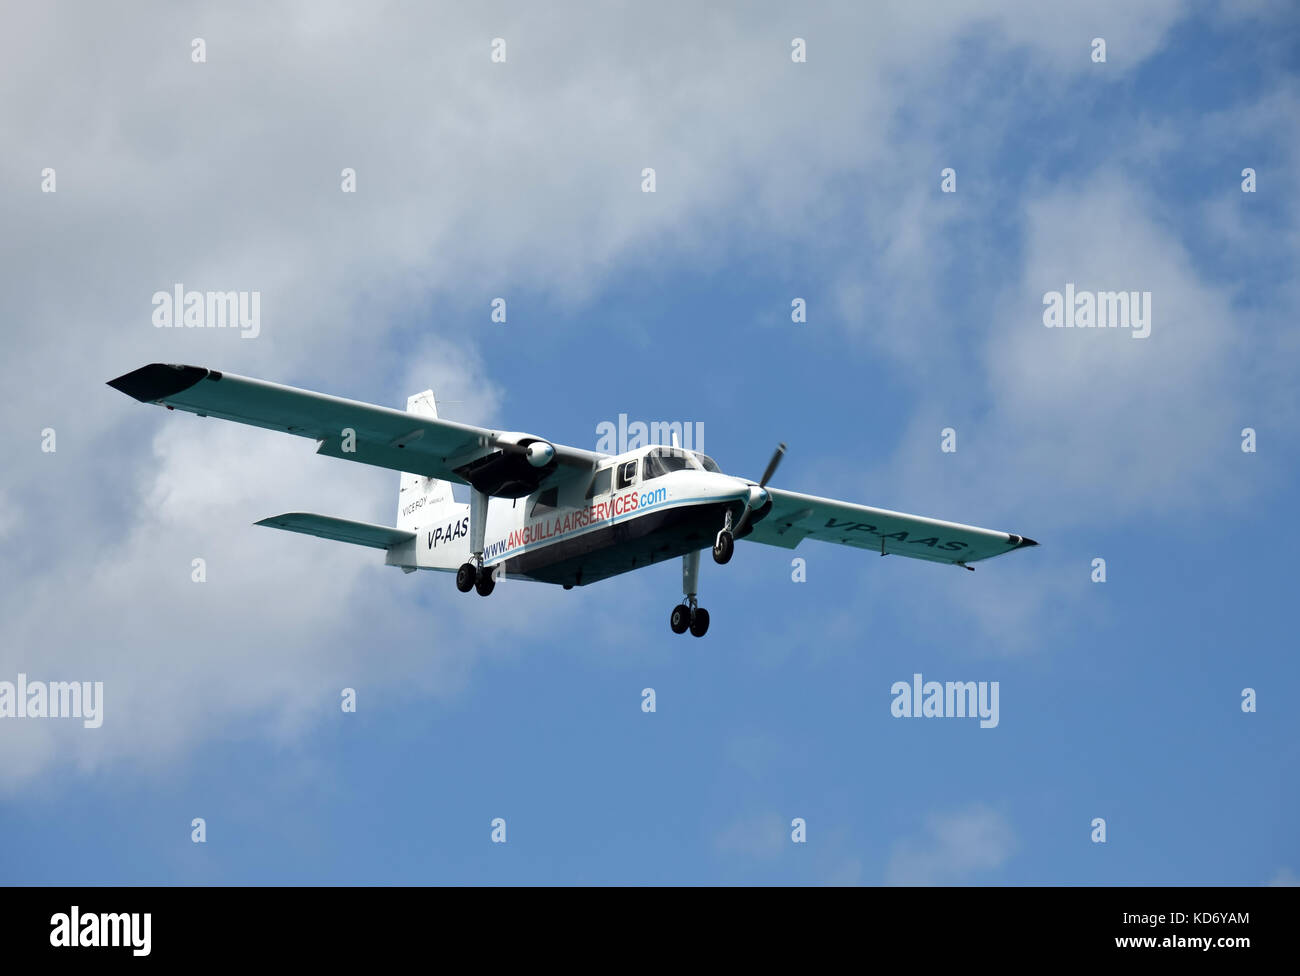 PHILIPSBURG - DECEMBER 24: Anguilla Air Services turboprop airplane arrives in Philipsburg, Saint Maarten in the Caribbean. The airline connects the s Stock Photo